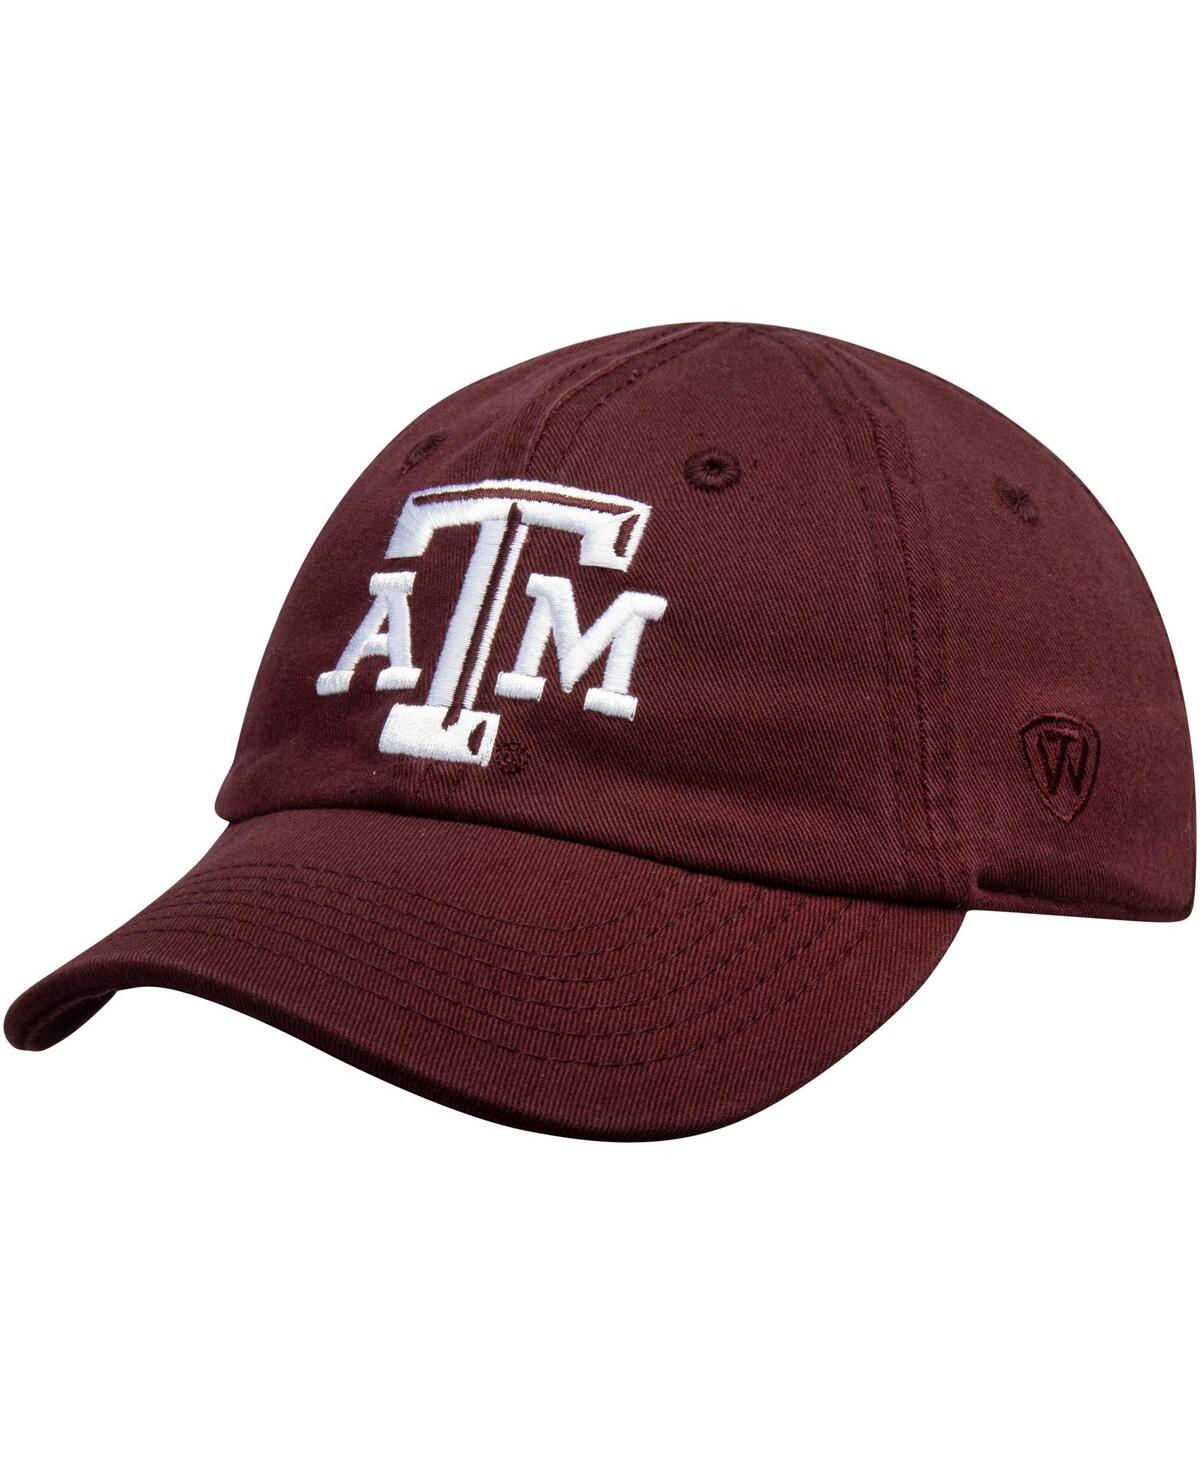 Top Of The World Kids' Infant Unisex  Maroon Texas A&m Aggies Mini Me Adjustable Hat